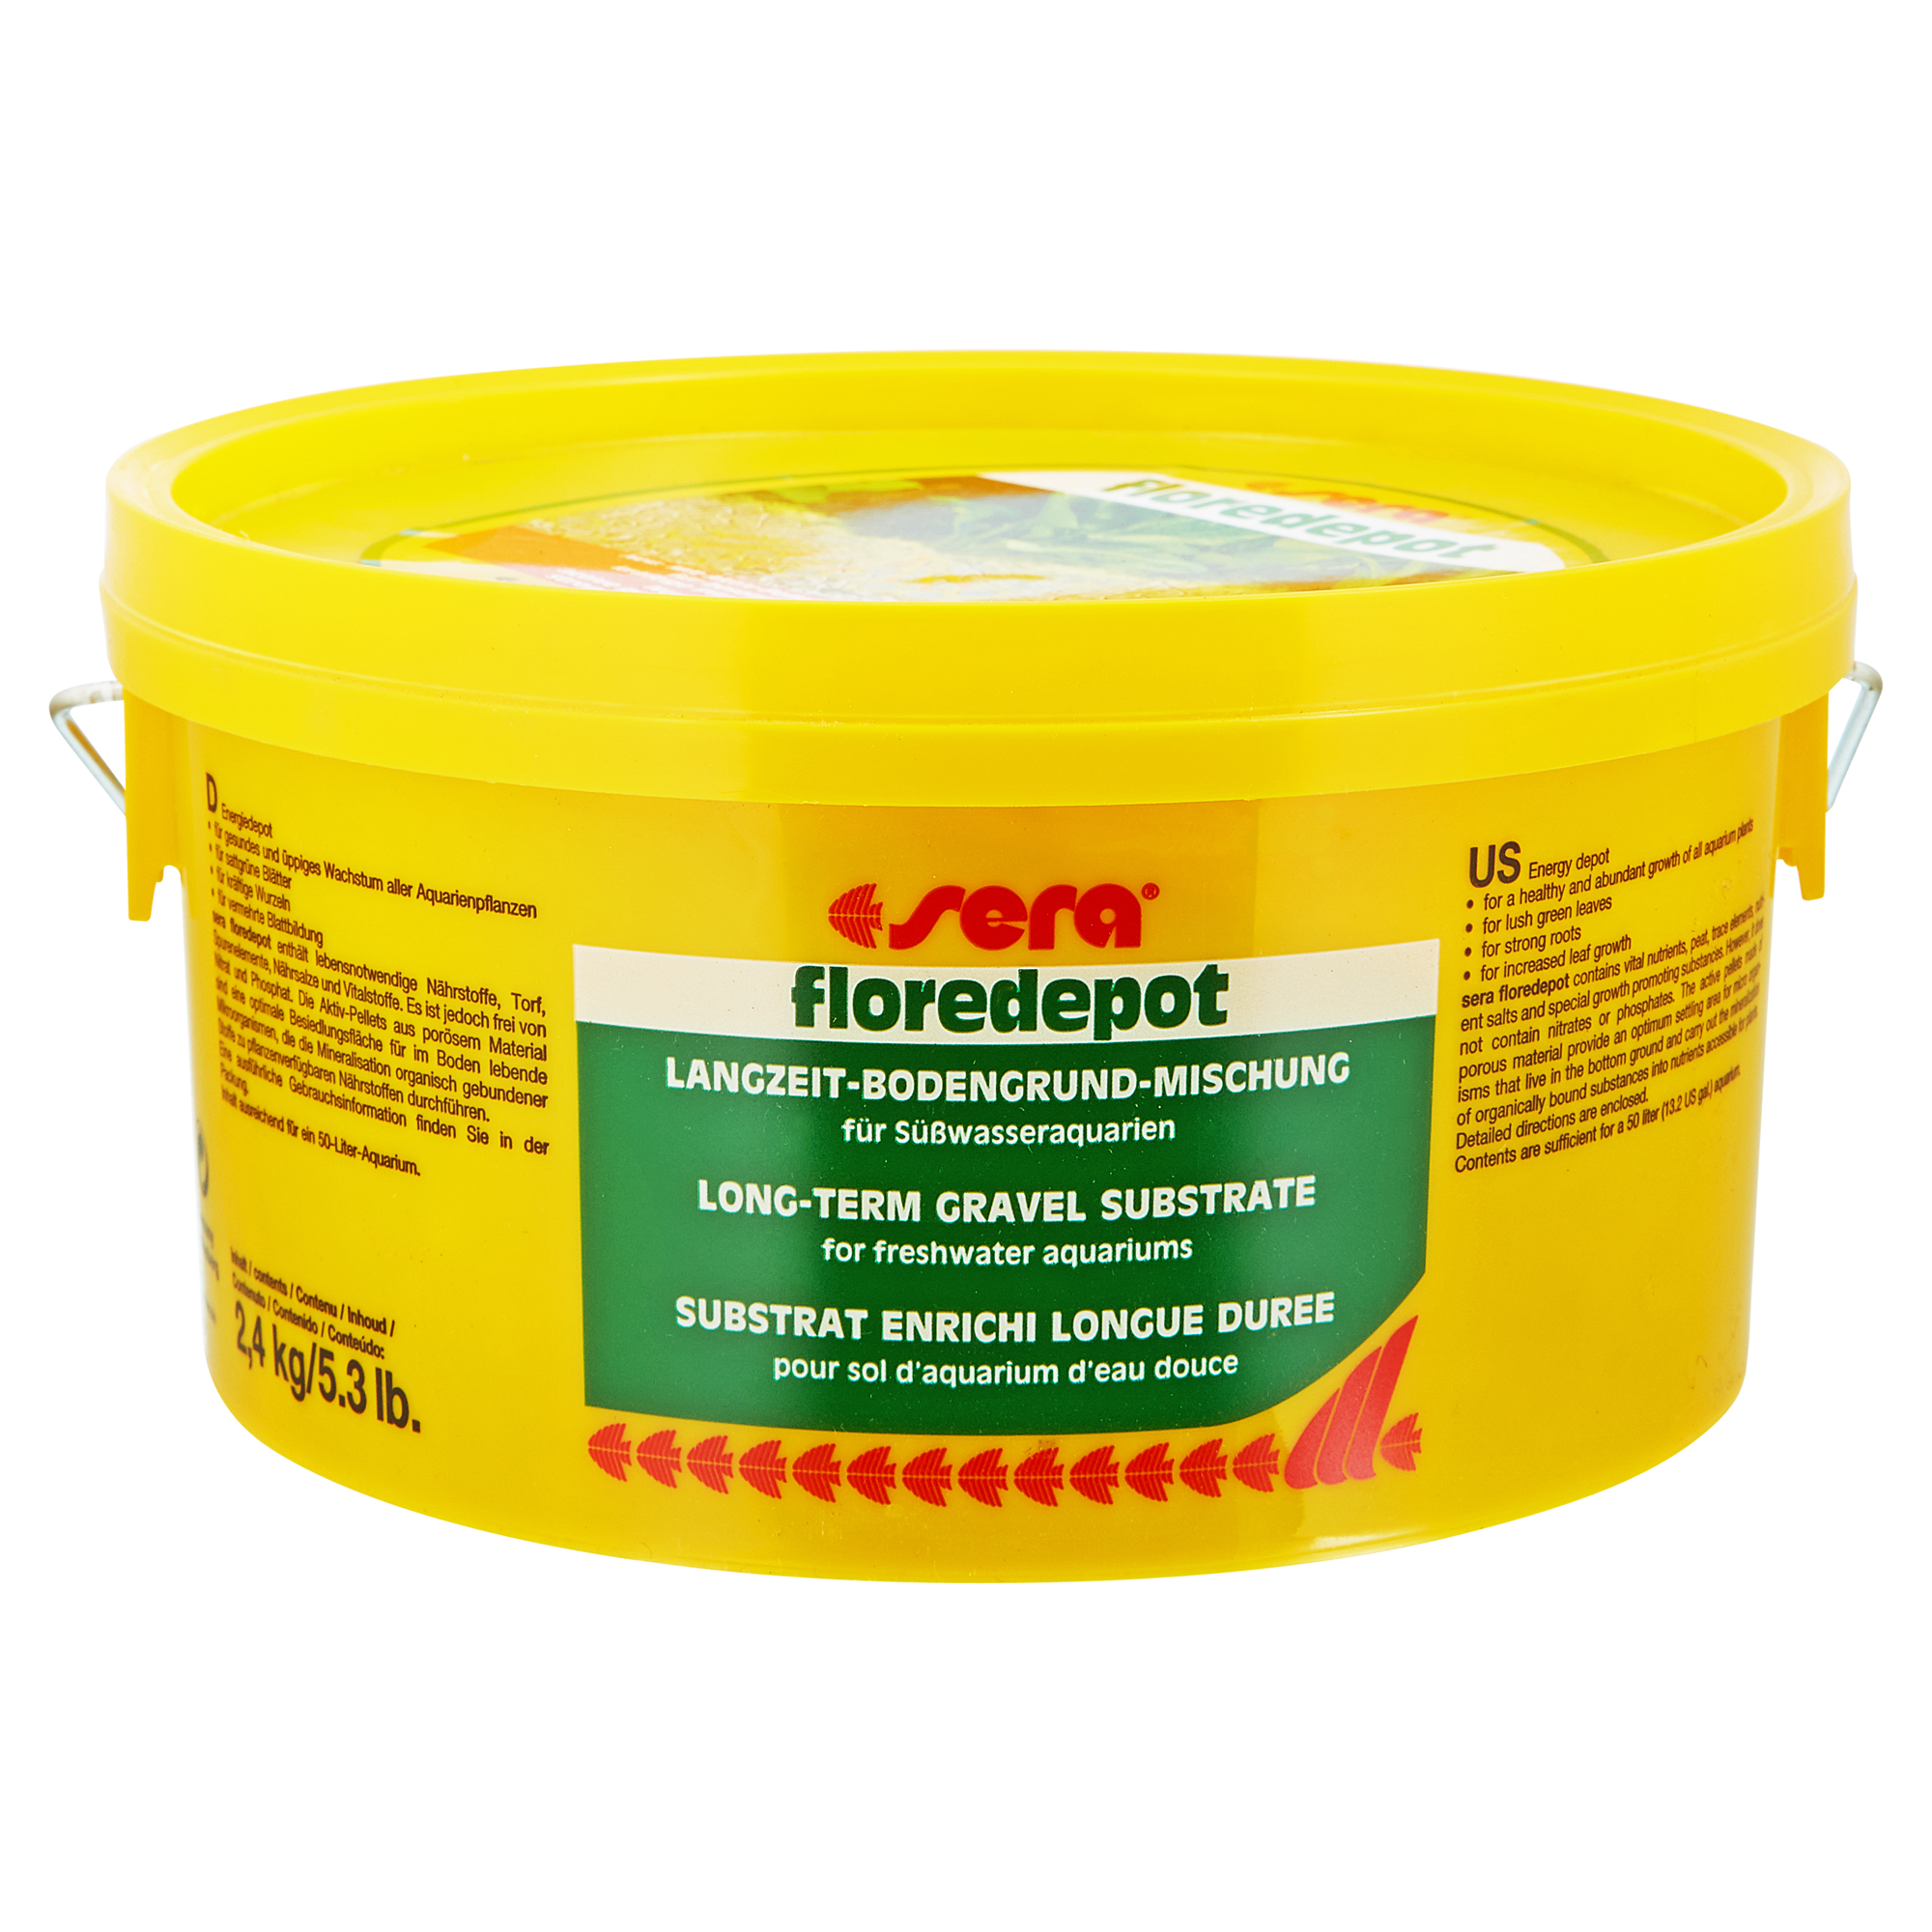 Bodengrundmischung "Floredepot" 2,4 kg + product picture